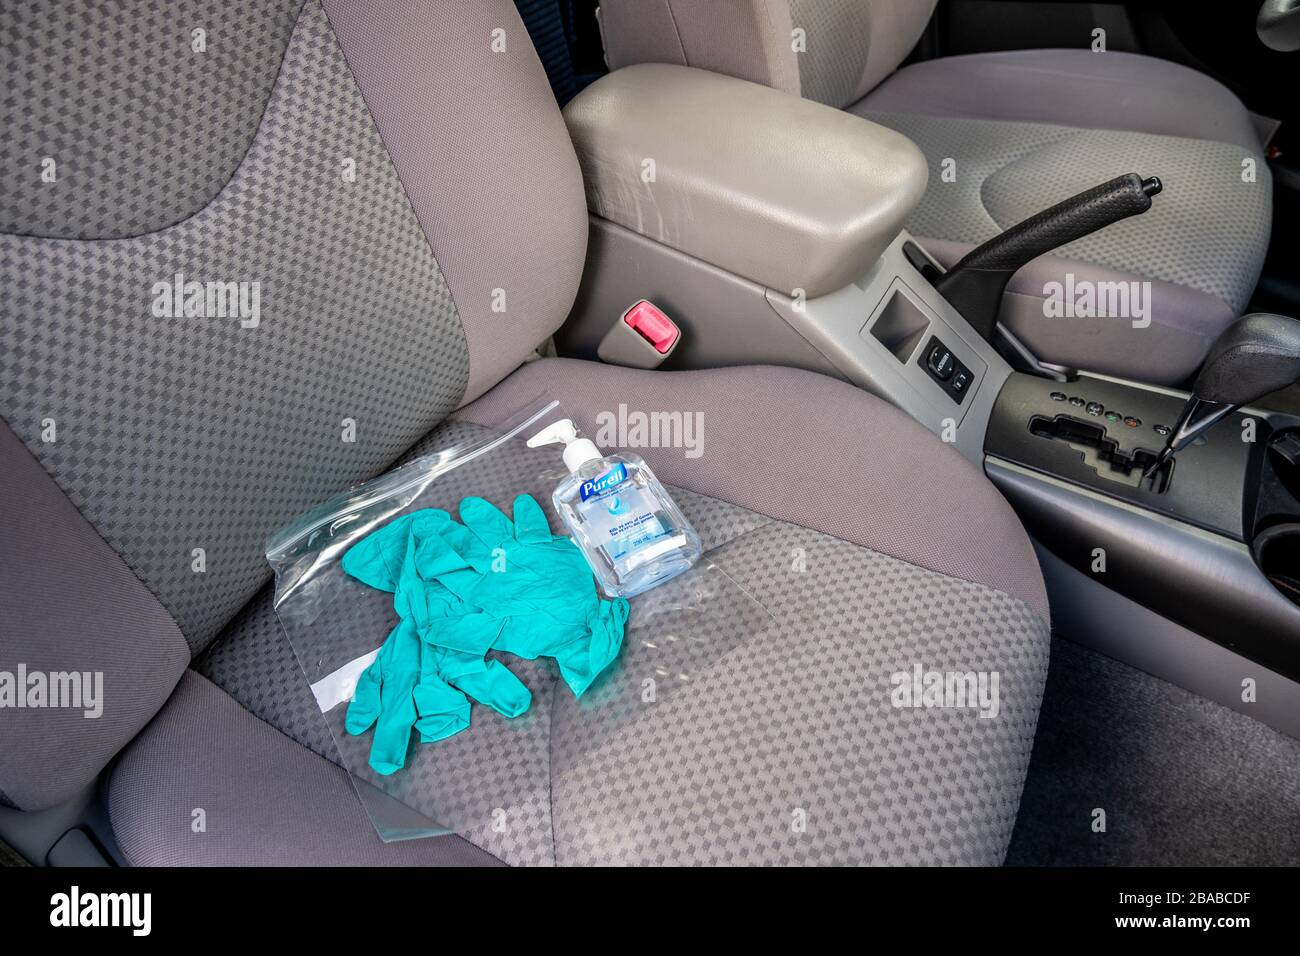 Surrey, Canada - March 25, 2020: Green nitrile disposable gloves and hand sanitizer with plastic bag on car seat during time of Coronavirus pandemic Stock Photo